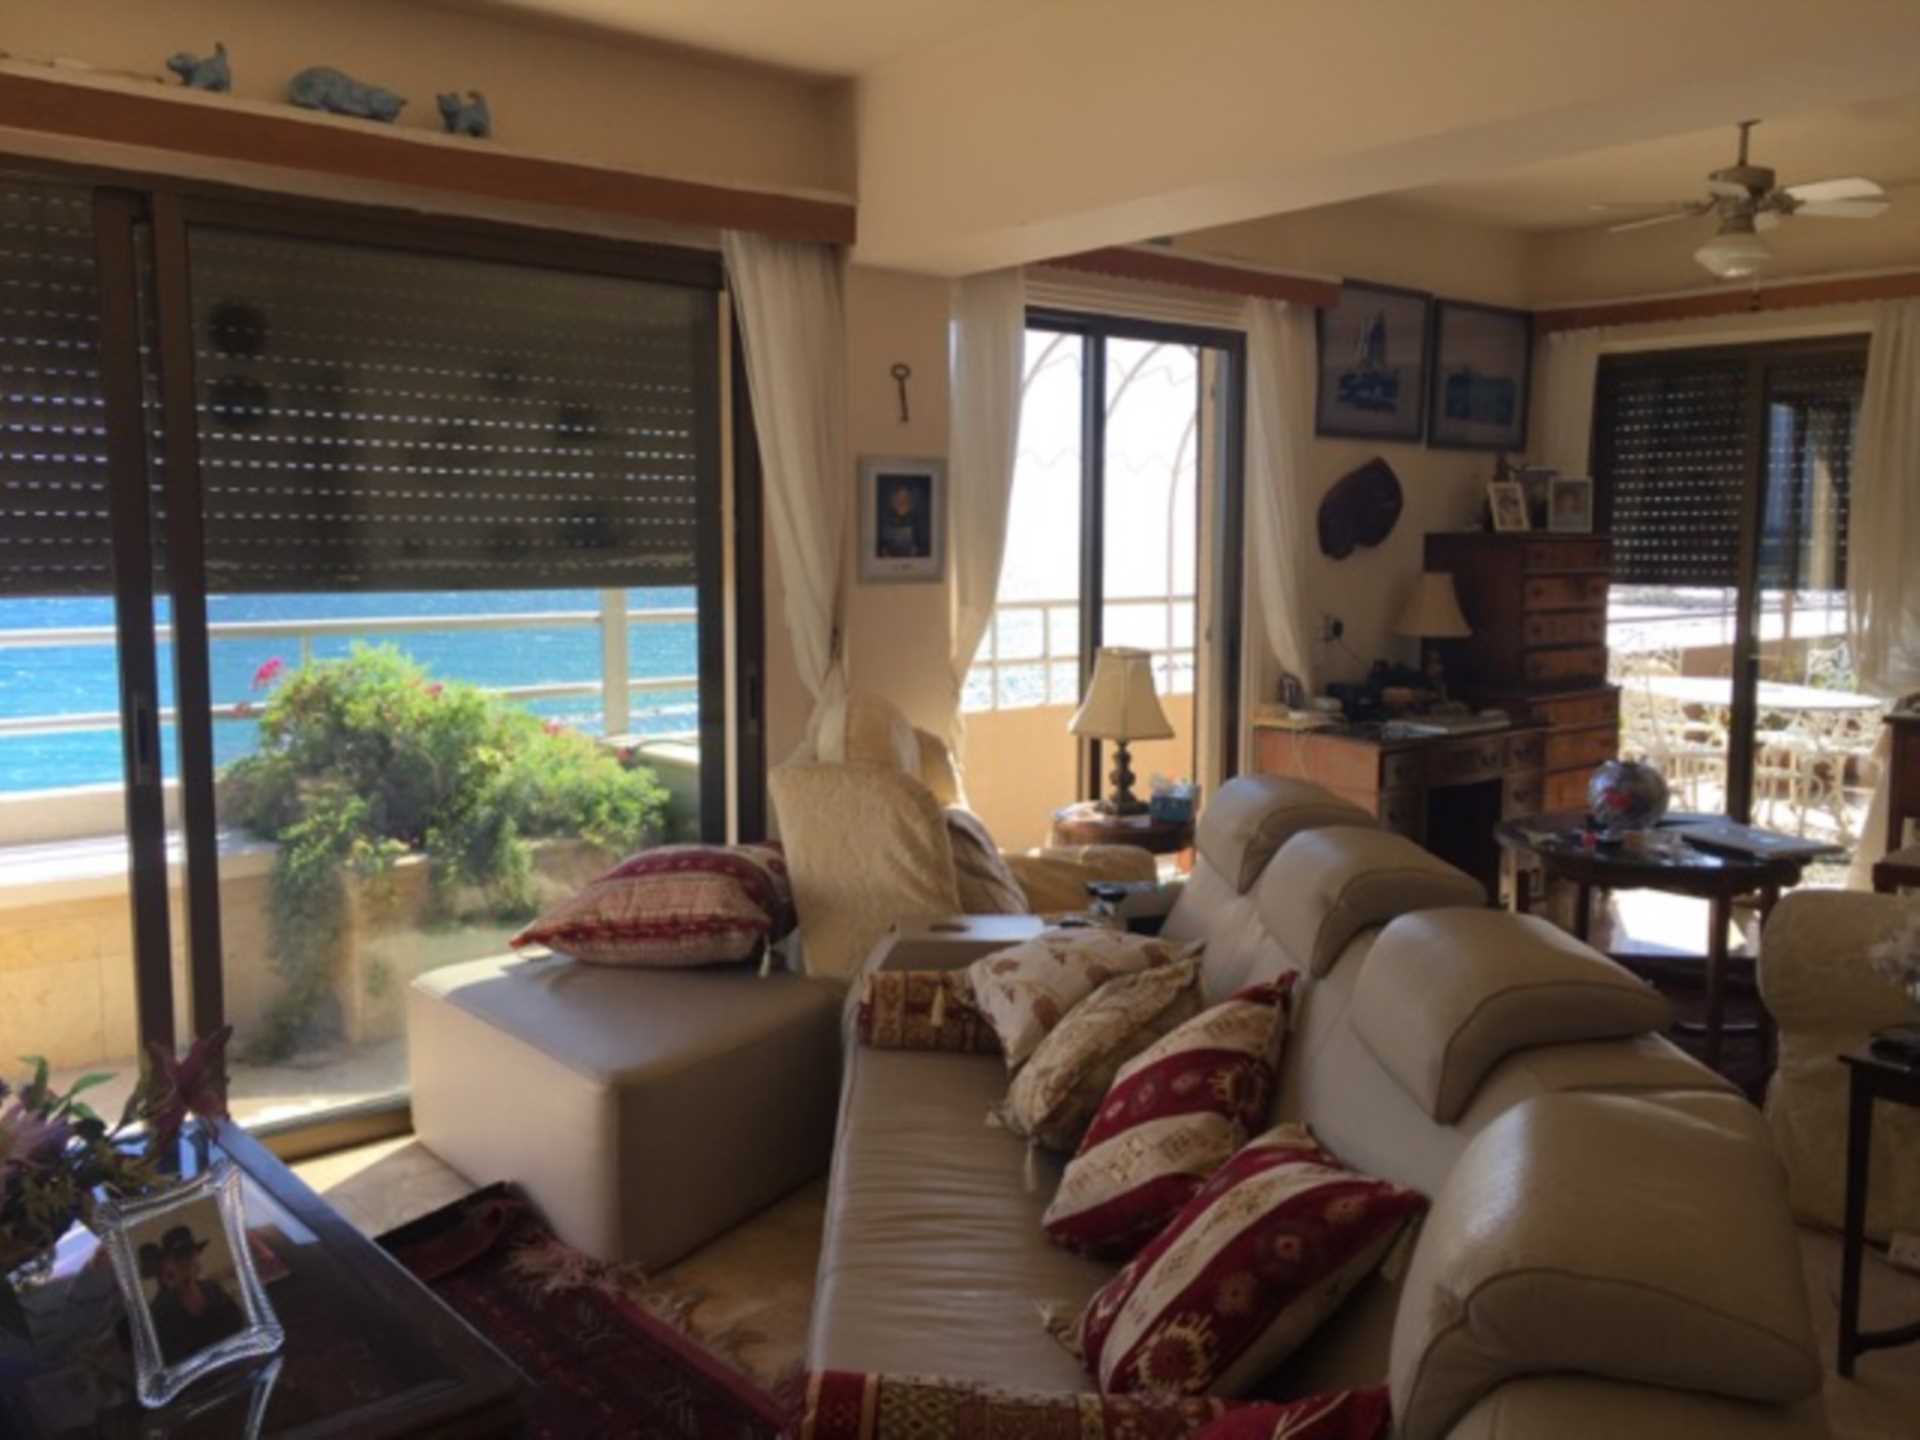 Panelson Court, Zygi, Cyprus TOP FLOOR PENTHOUSE APARTMENT 2 BED 2 BATH S LESS THAN 30FT FROM THE MEDITERRANEAN, Image 3